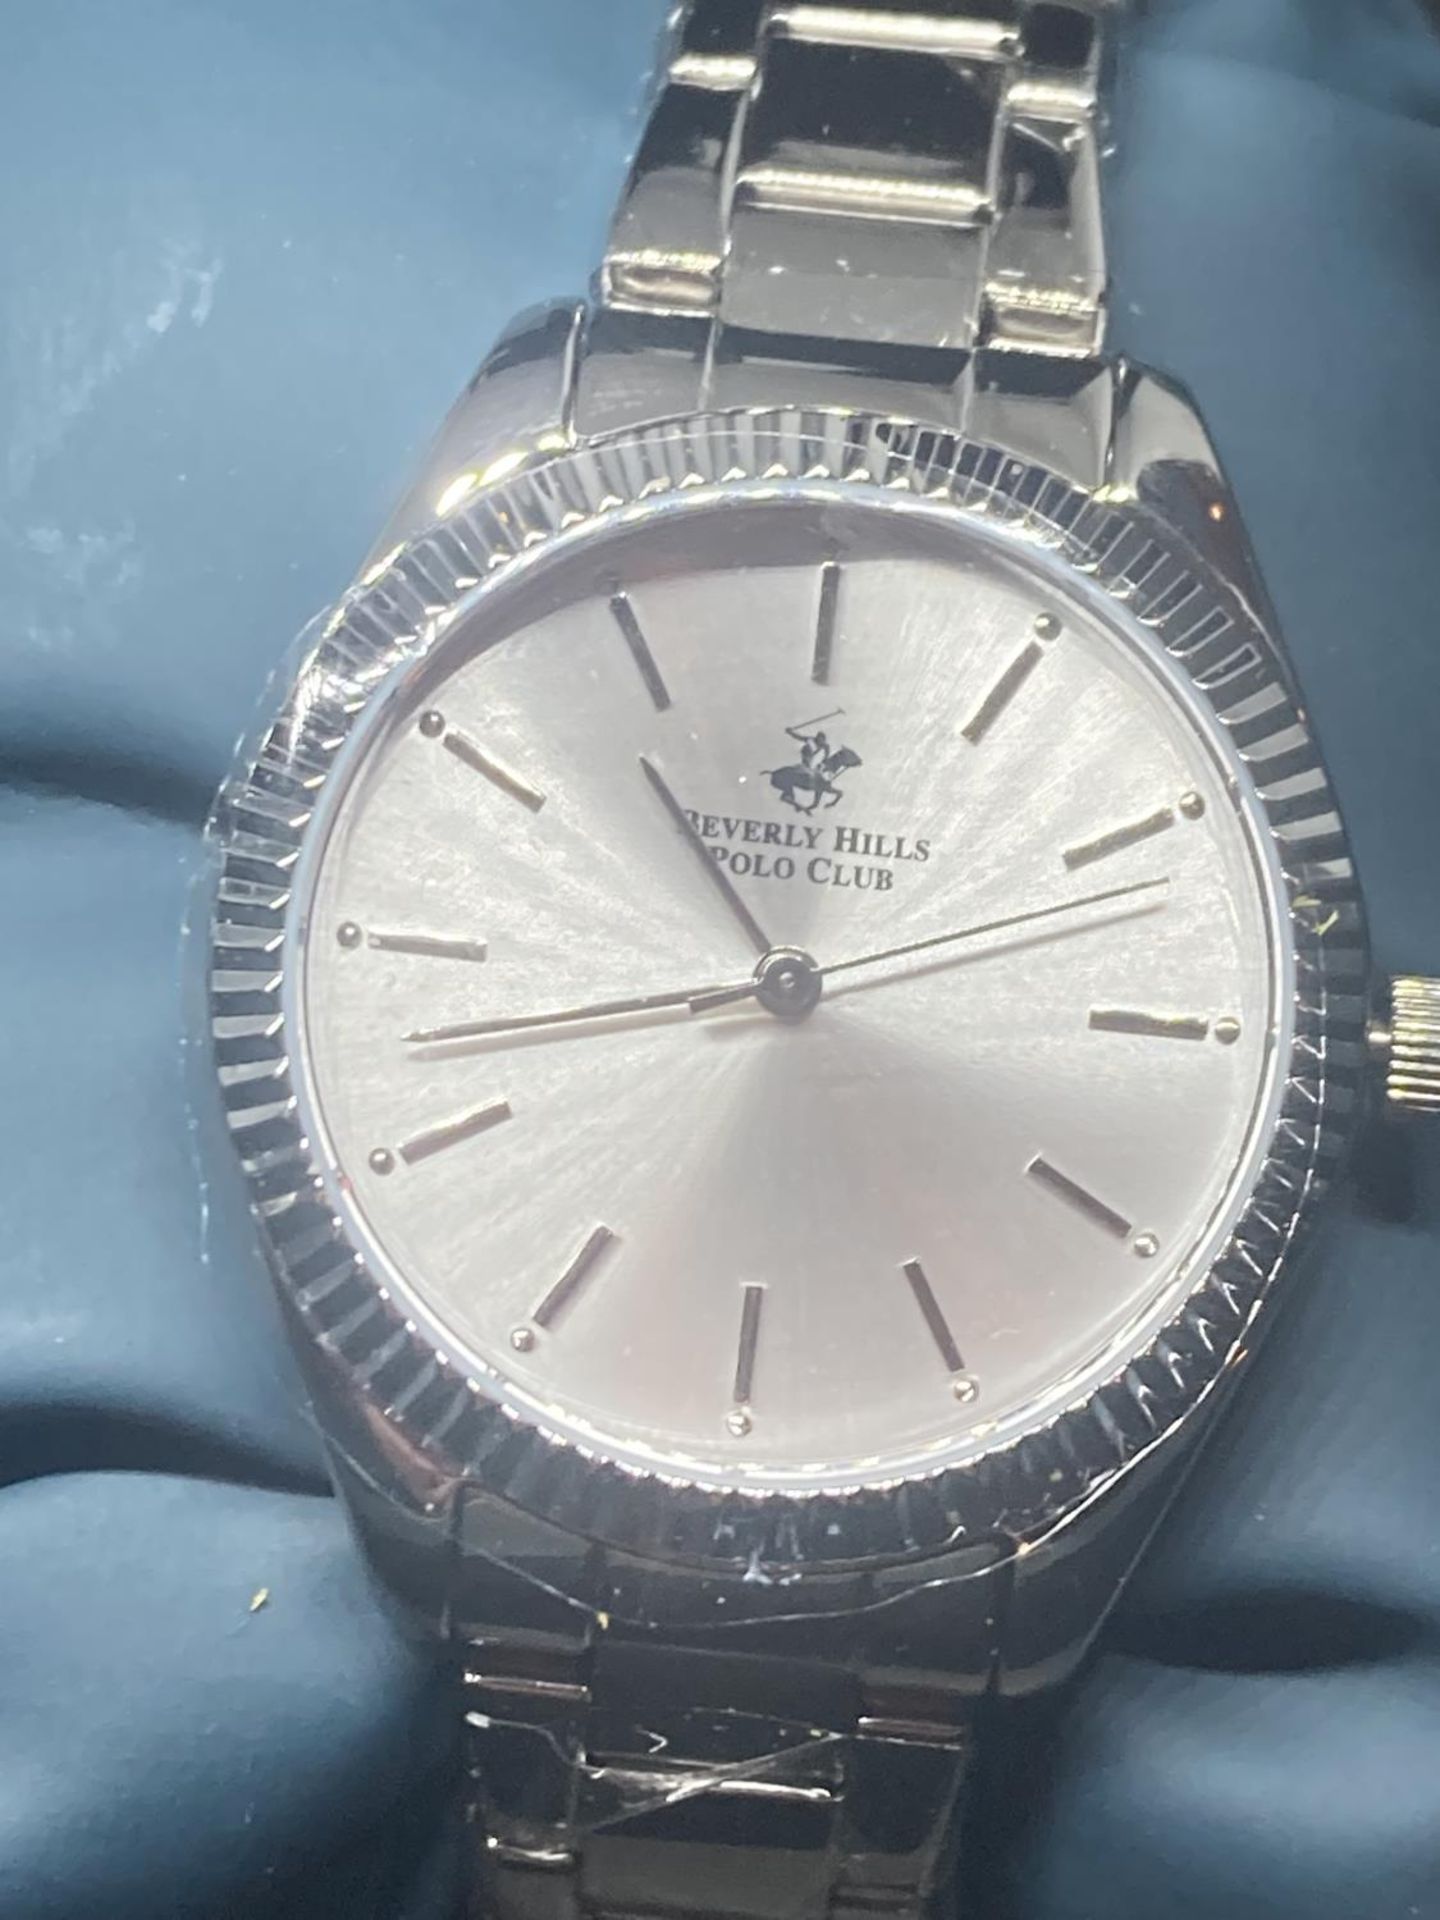 AN AS NEW AND BOXED BEVERLEY HILLS POLO CLUB WRIST WATCH SEEN WORKING BUT NO WARRANTY - Image 4 of 10